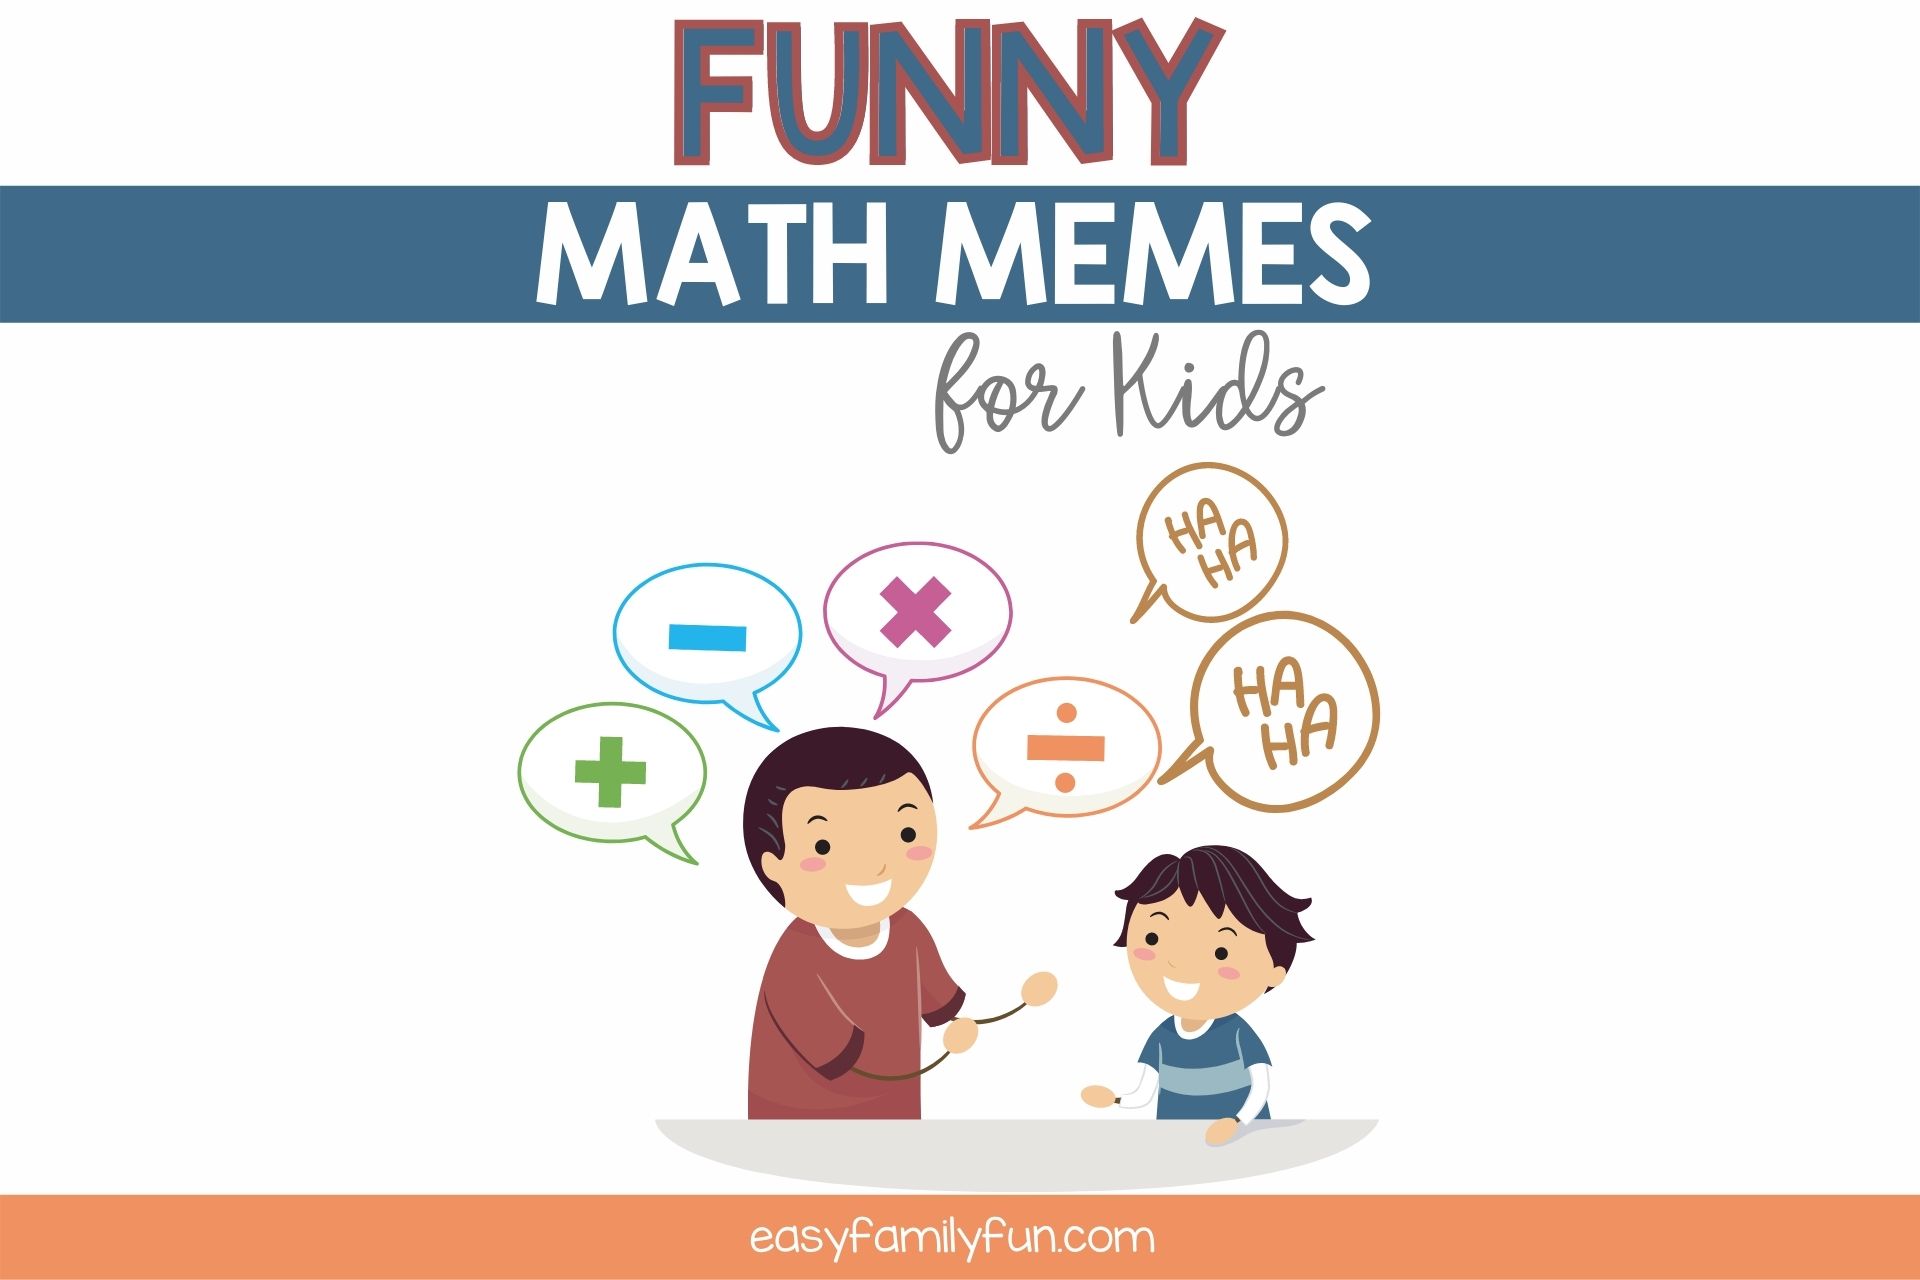 featured image: math memes for kids